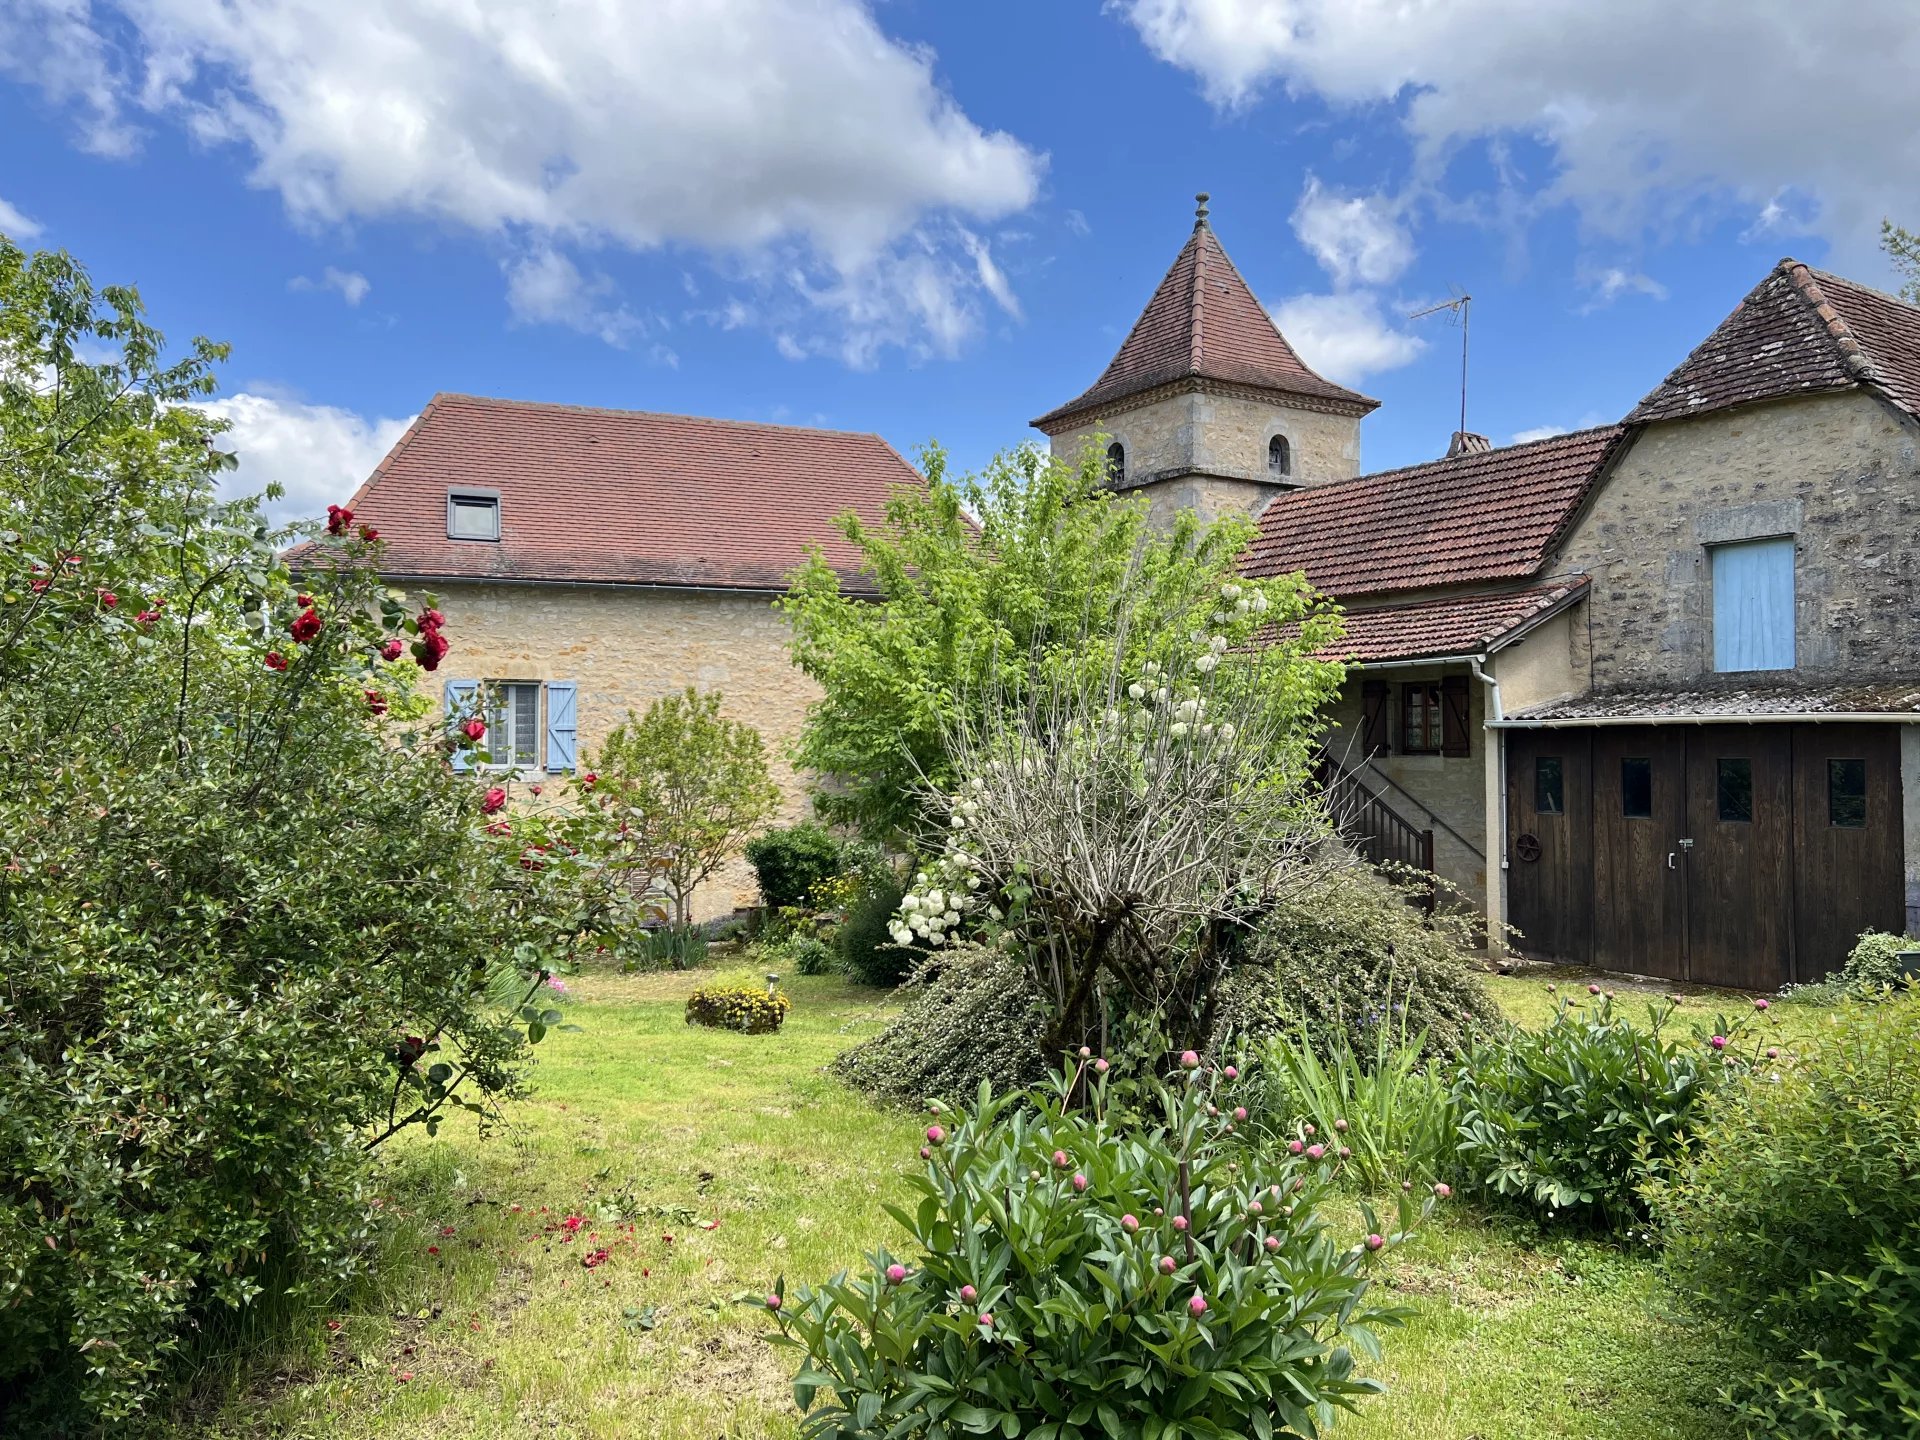 Exclusive to Beaux Villages! Traditional, stone house with pigeonnier and breathtaking views!